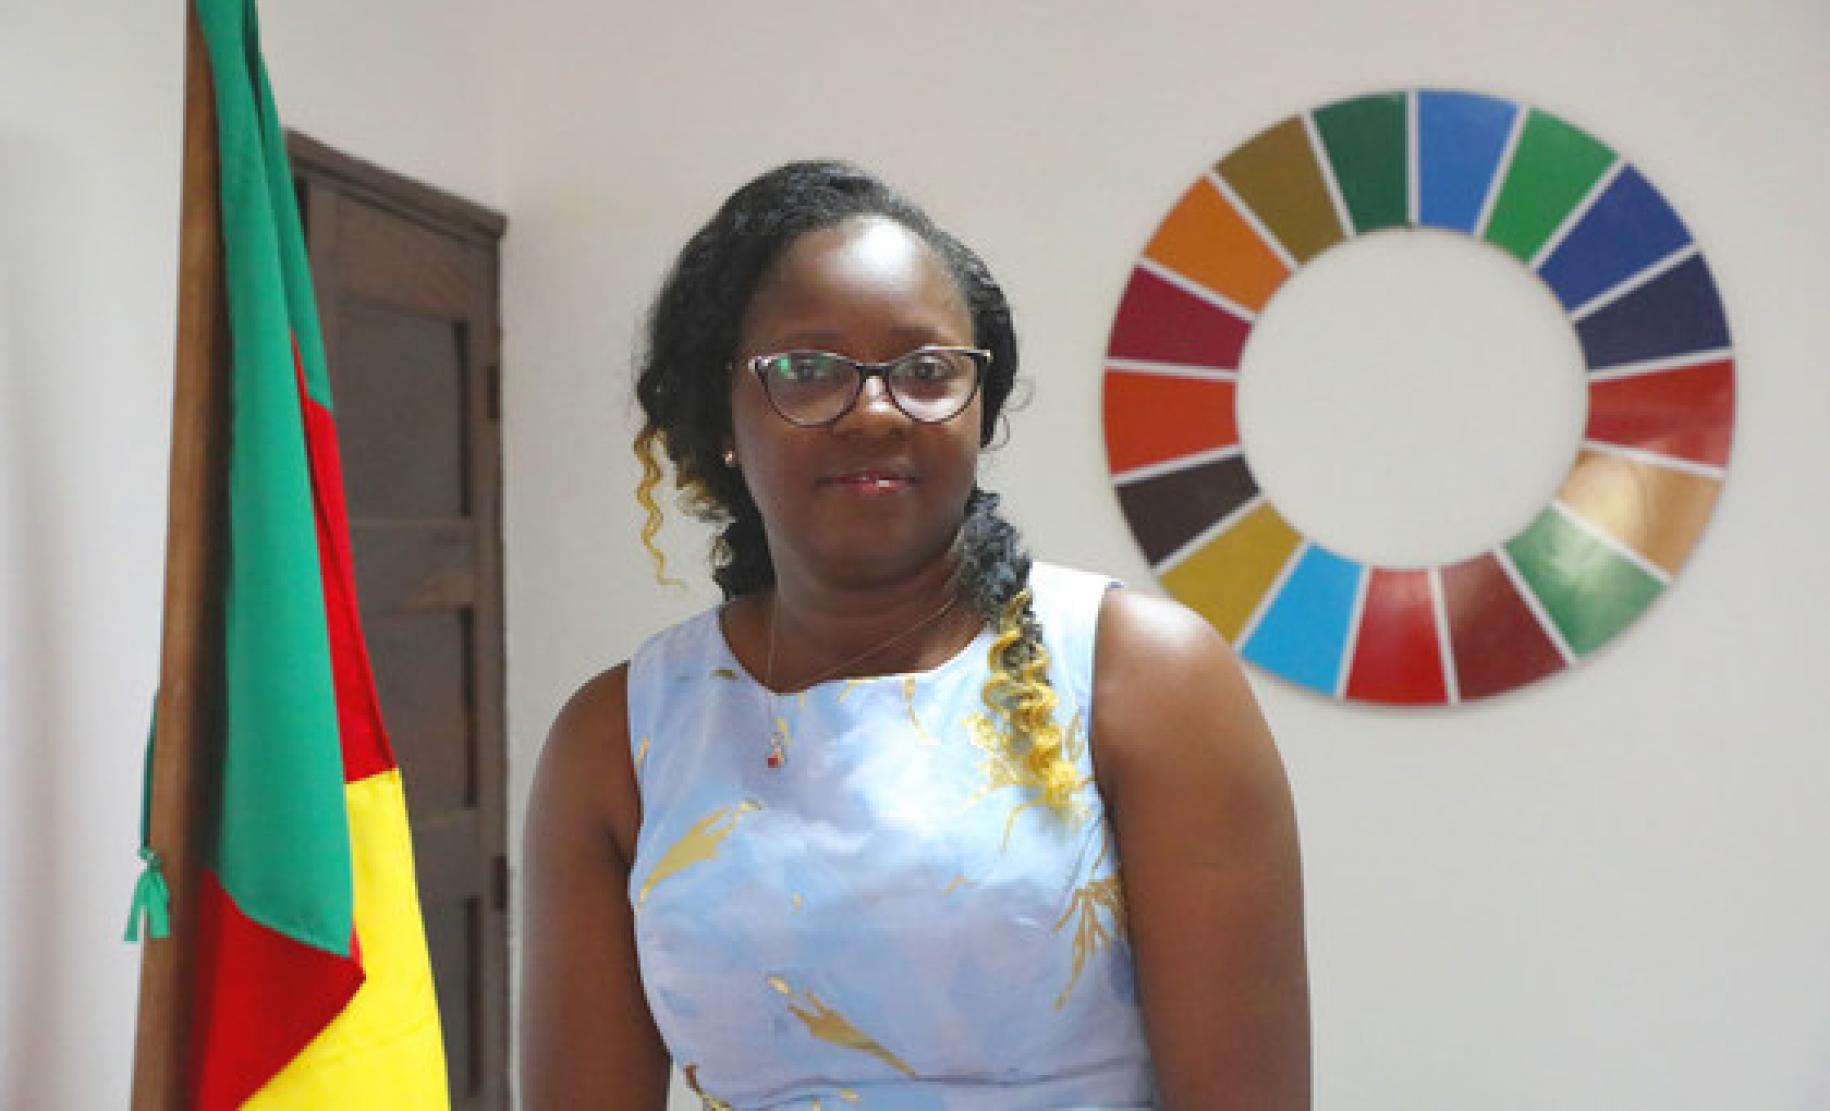 Photo showsCecile Mawe, founder and President of Jeunes en Action pour le Développement Durable (JADD), Cameroon., besides the Cameroon flag and the SDG wheel.